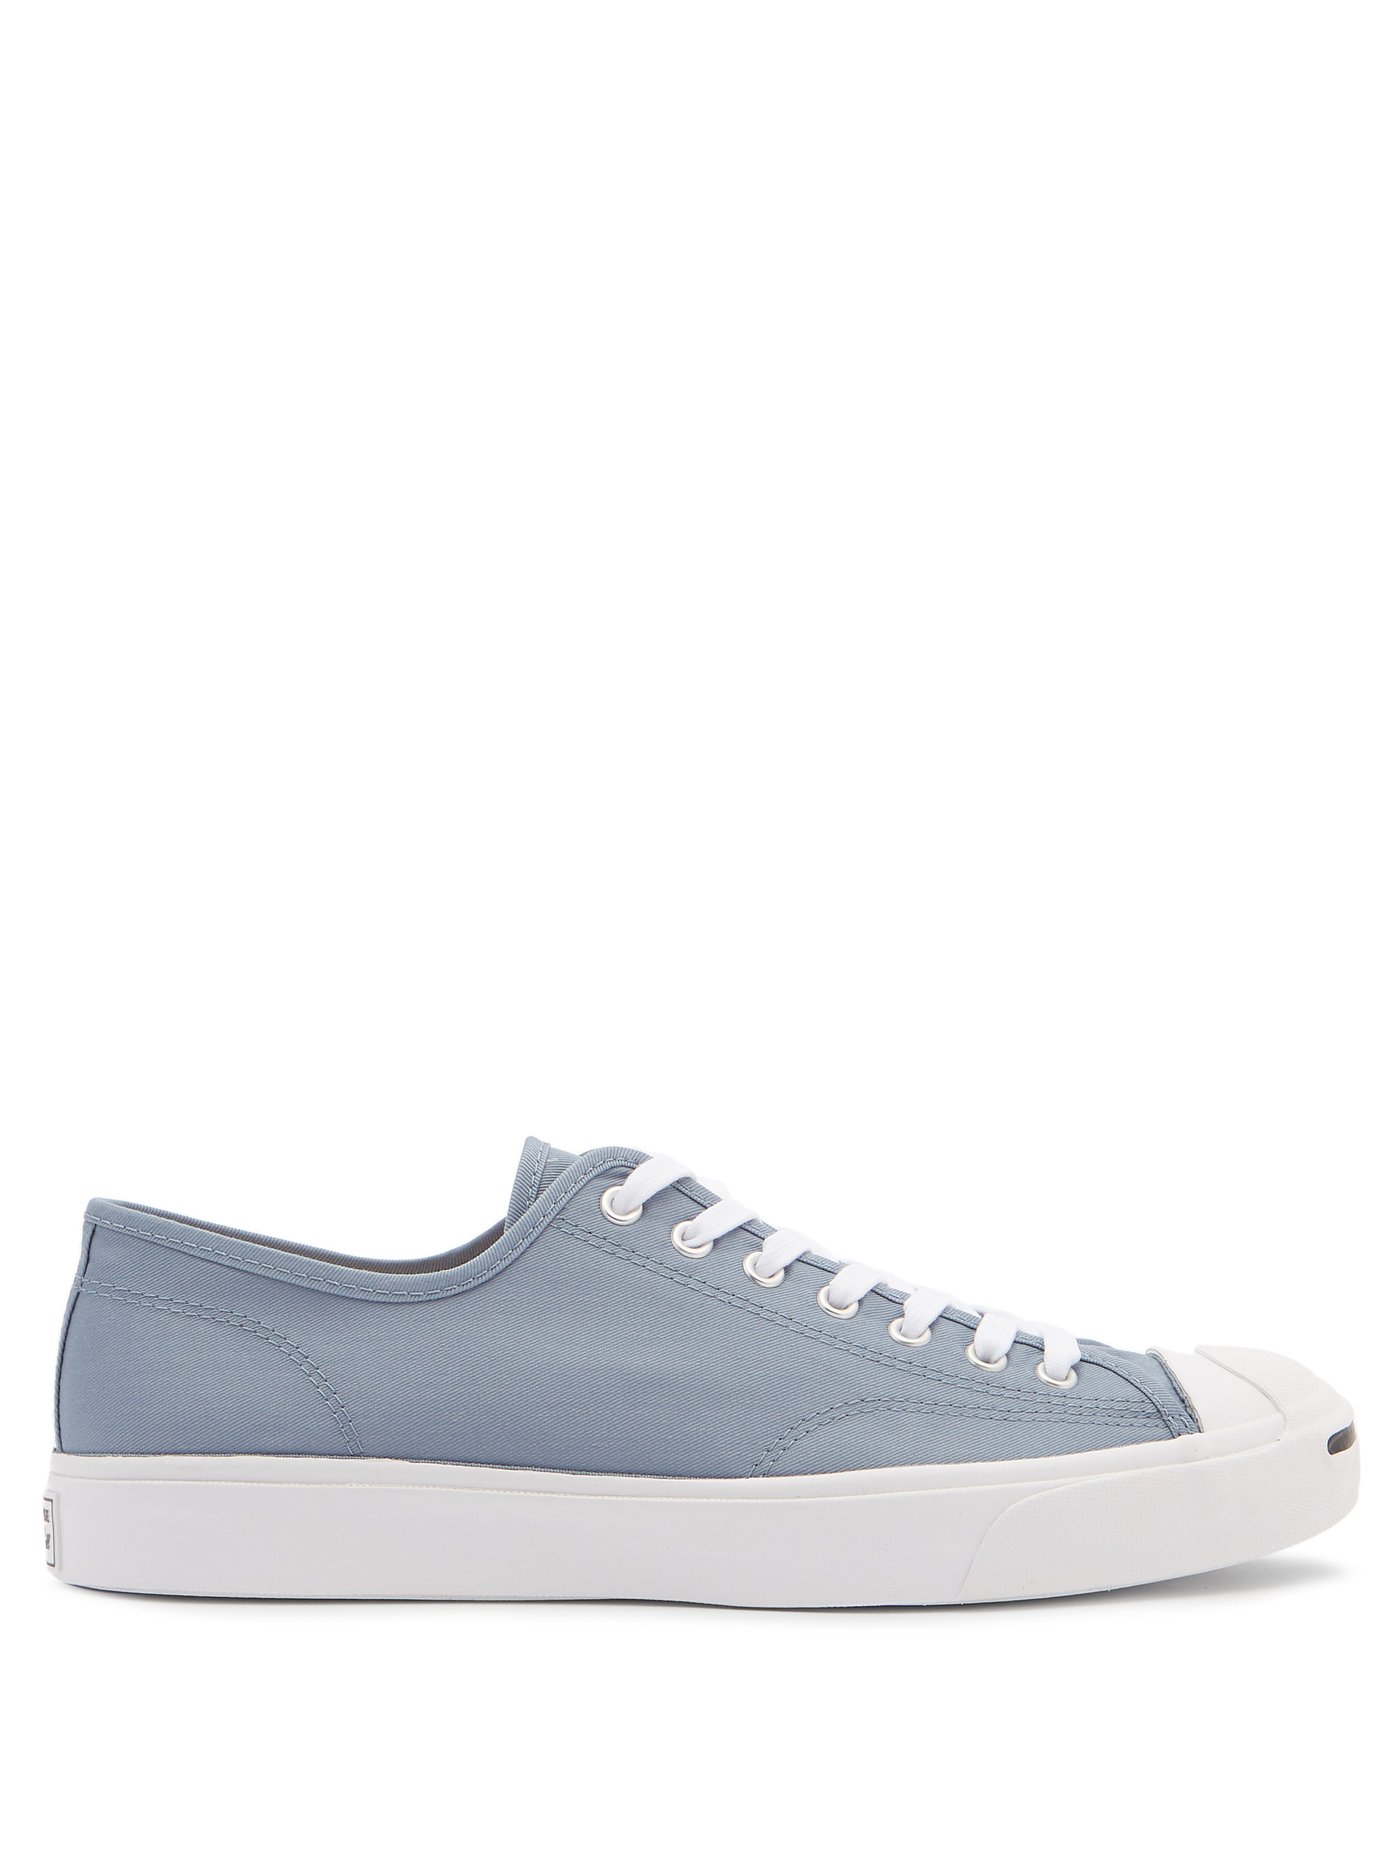 Jack Purcell canvas trainers | Converse 